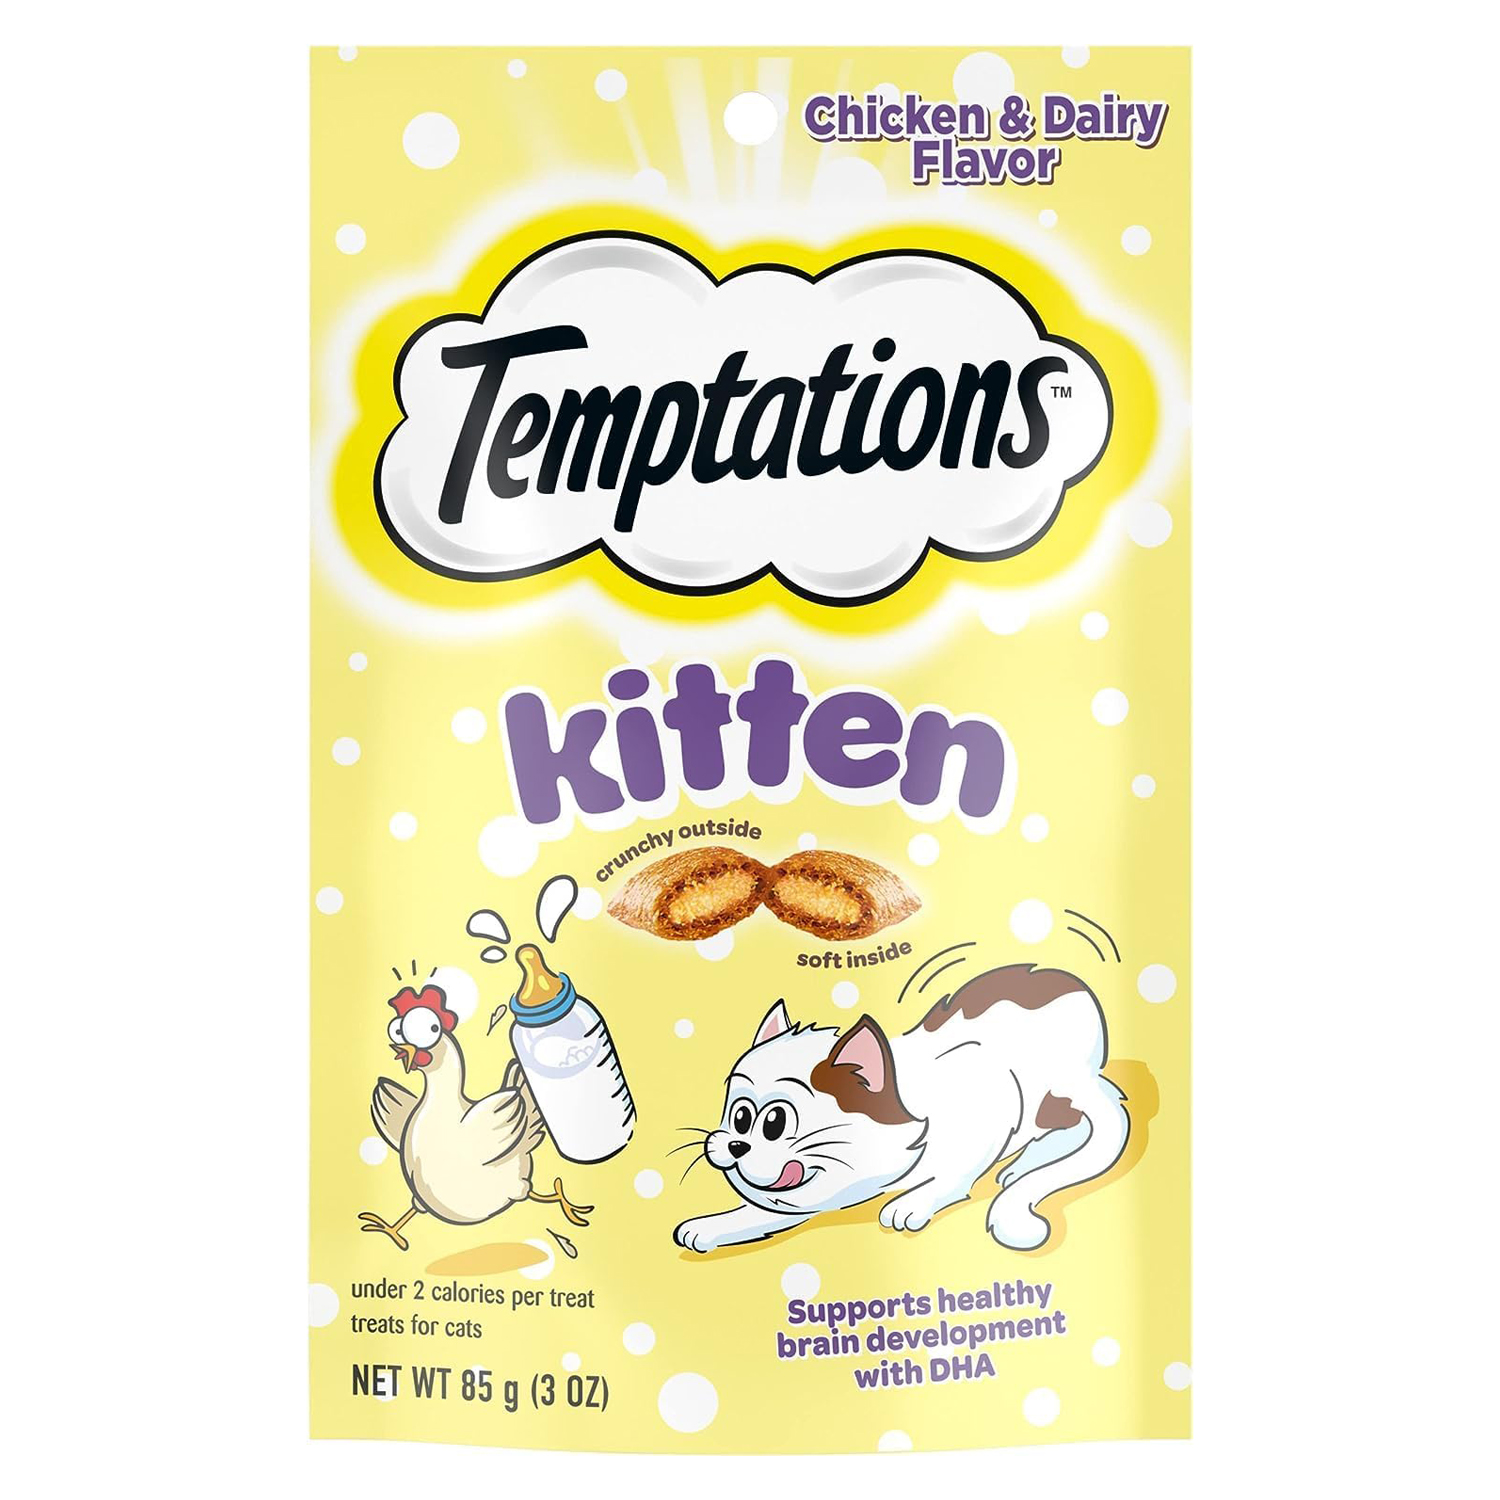 Temptations Chicken and Dairy Flavor Crunchy and Soft Kitten Treats